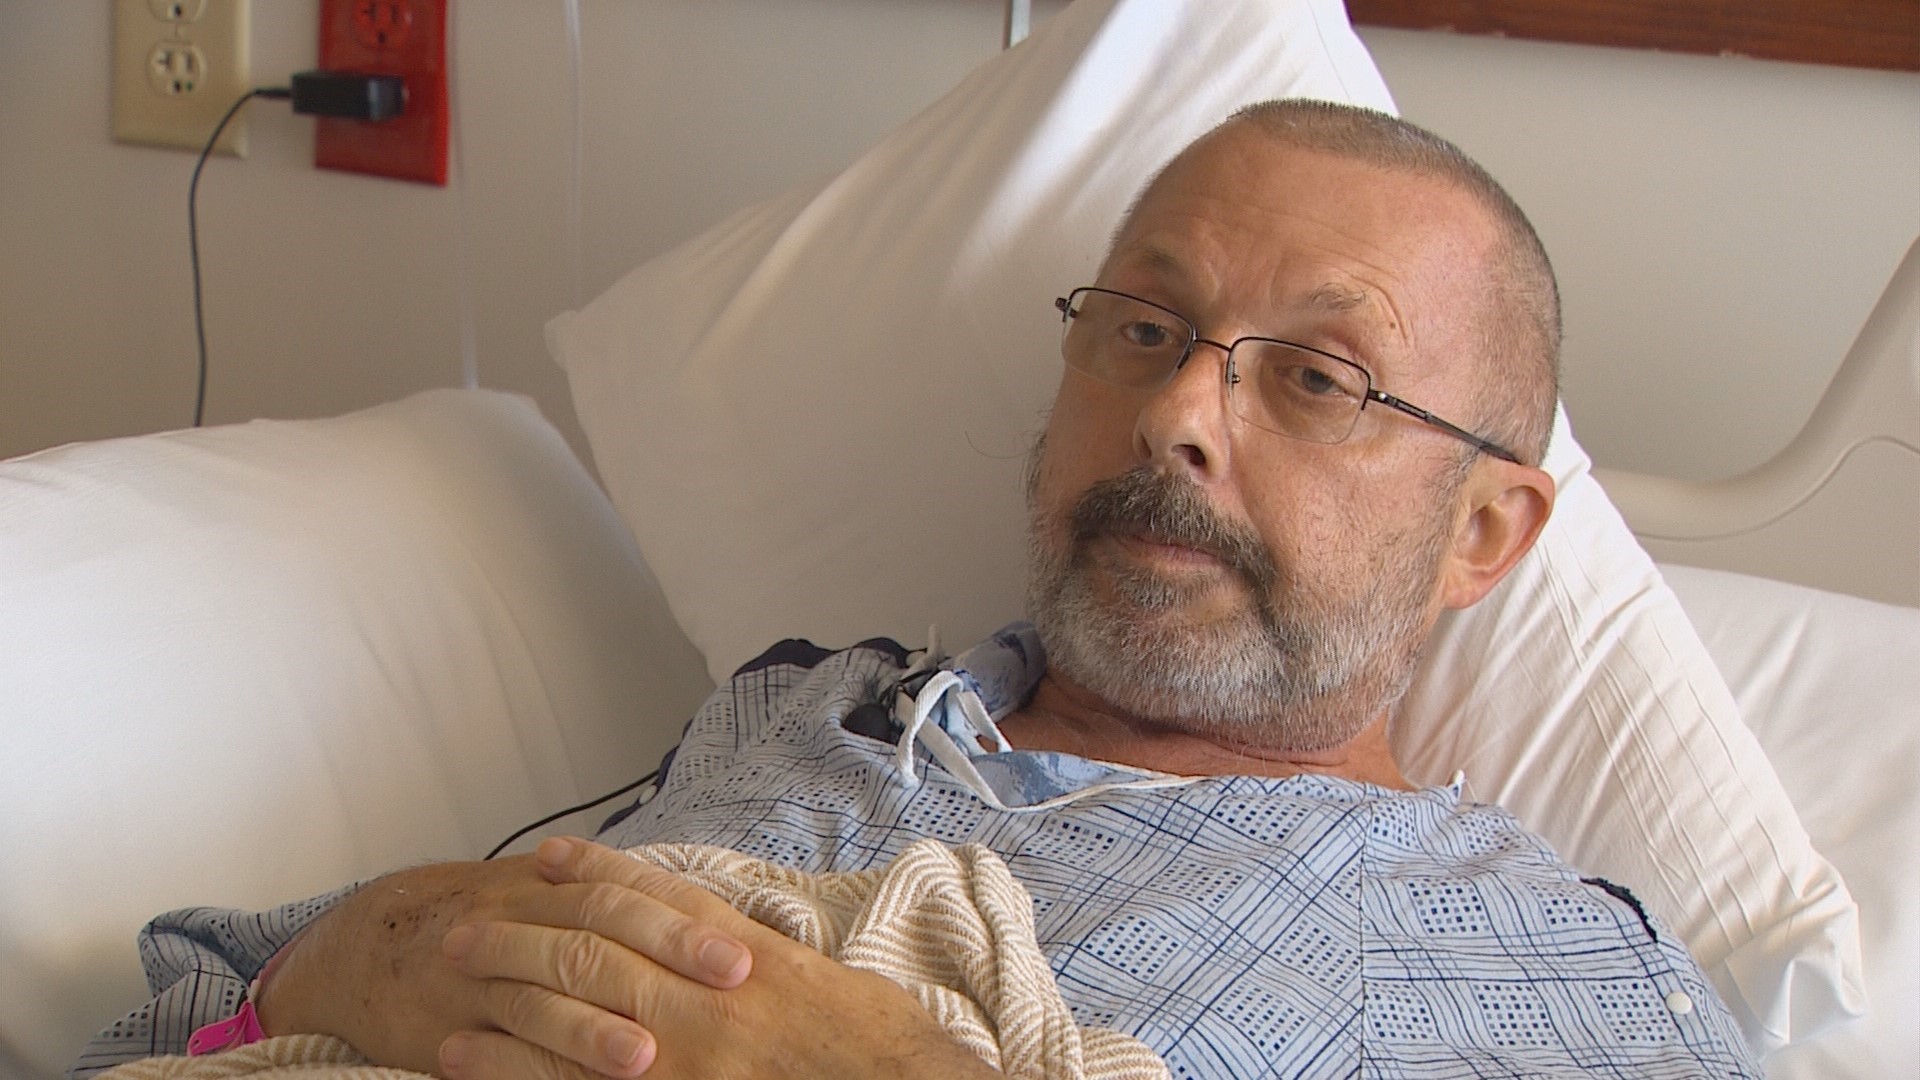 An Air Force Reserve veteran is getting a helping hand from his fellow vets in Wise County after surgery to remove a brain tumor that he believes was sparked by his service to his country.